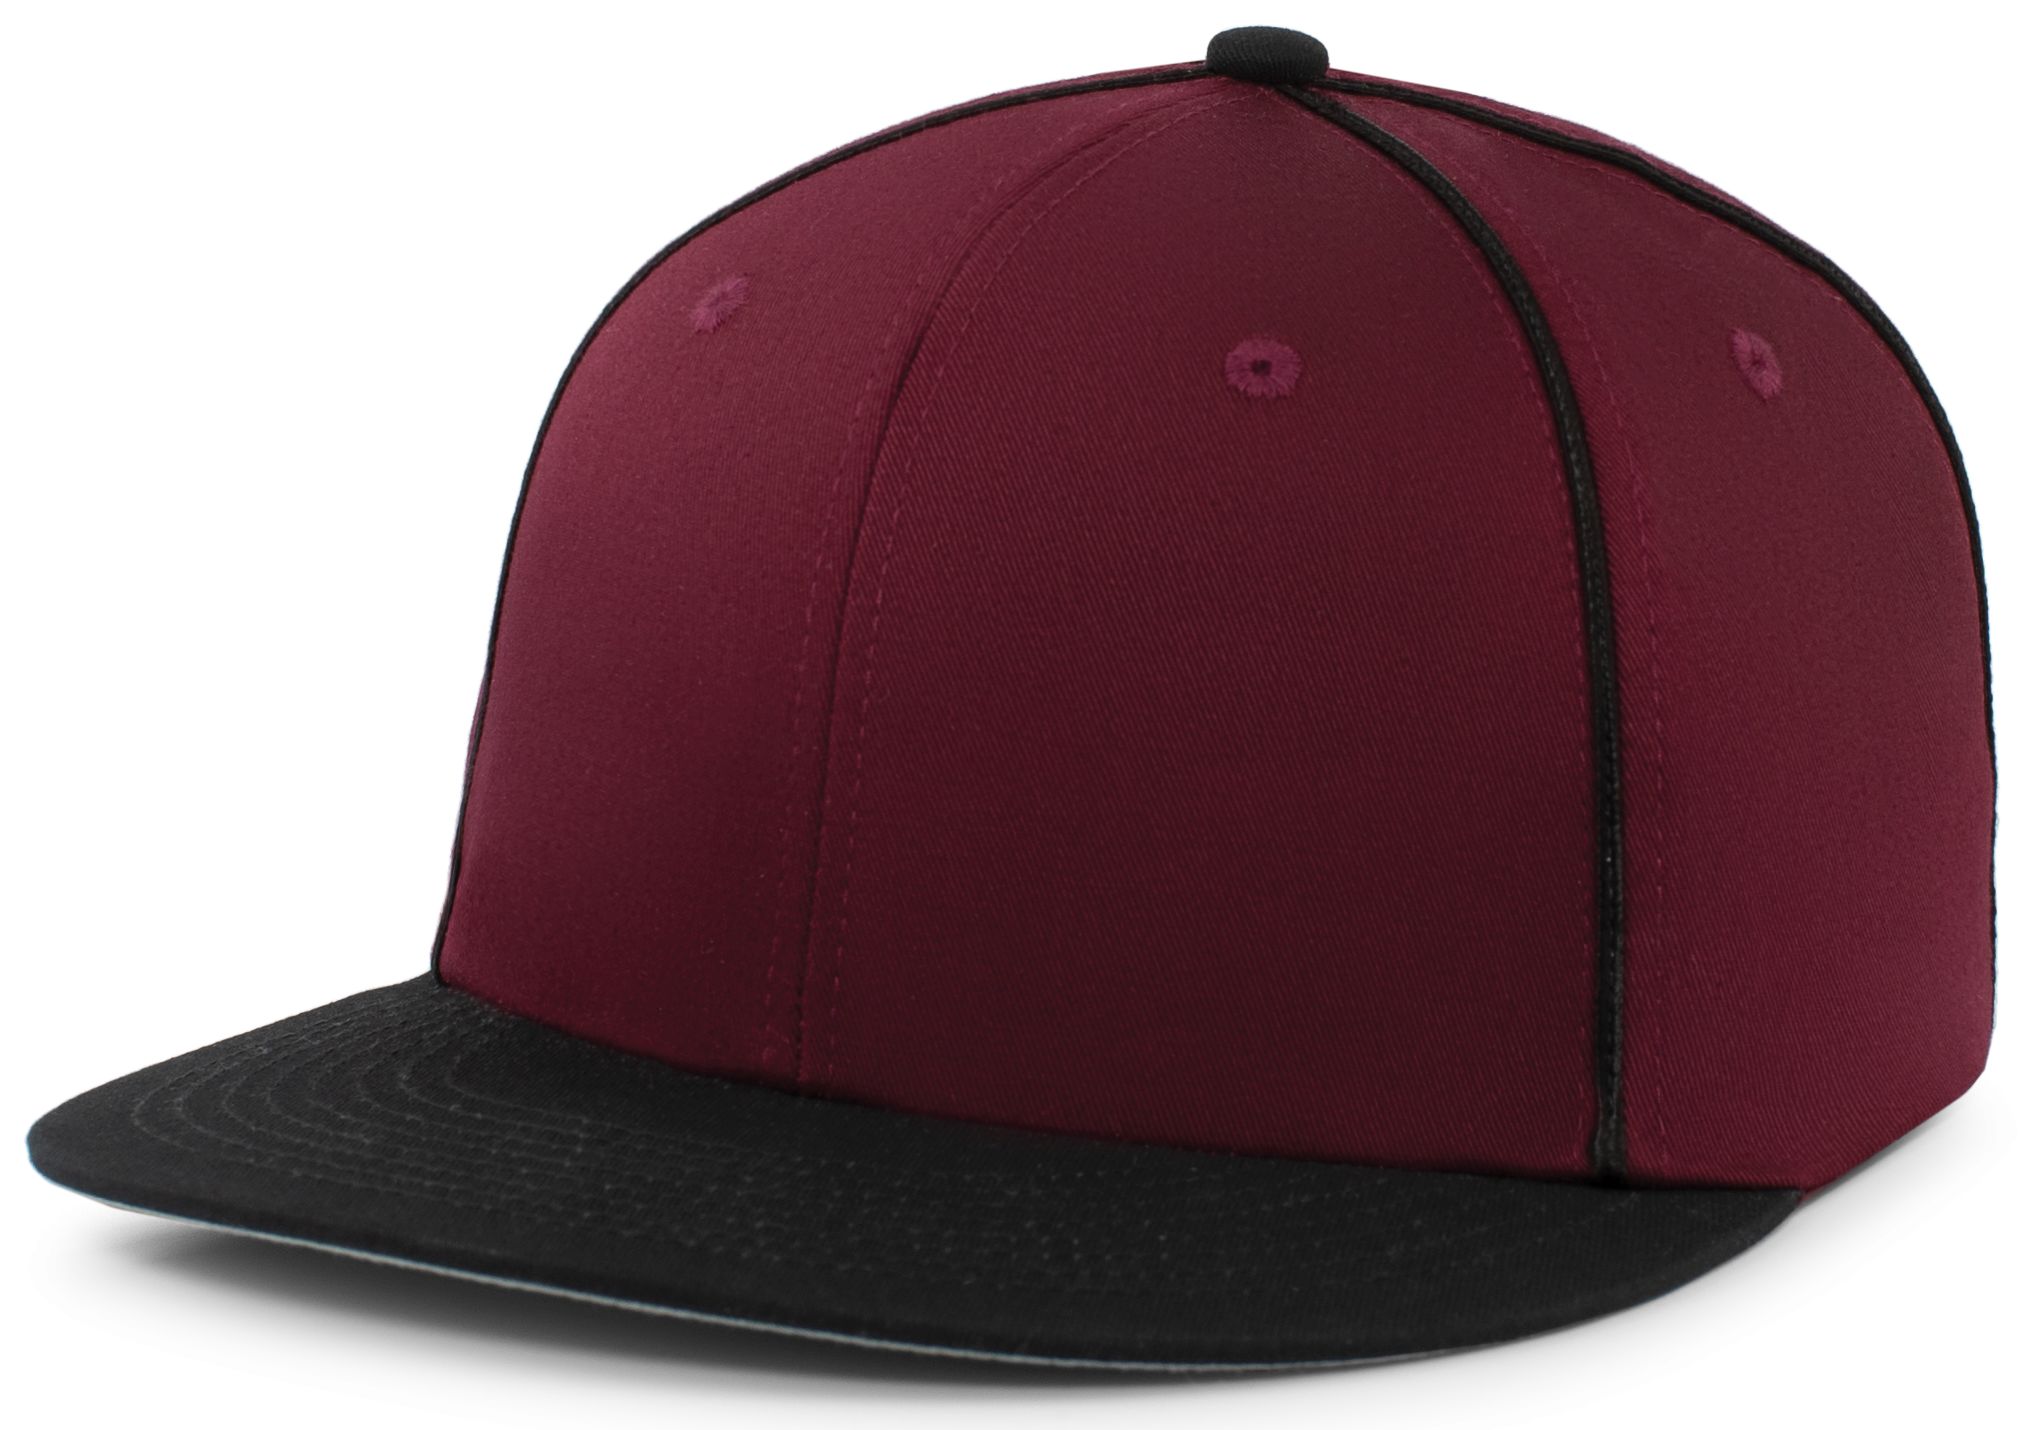 click to view Maroon/Black